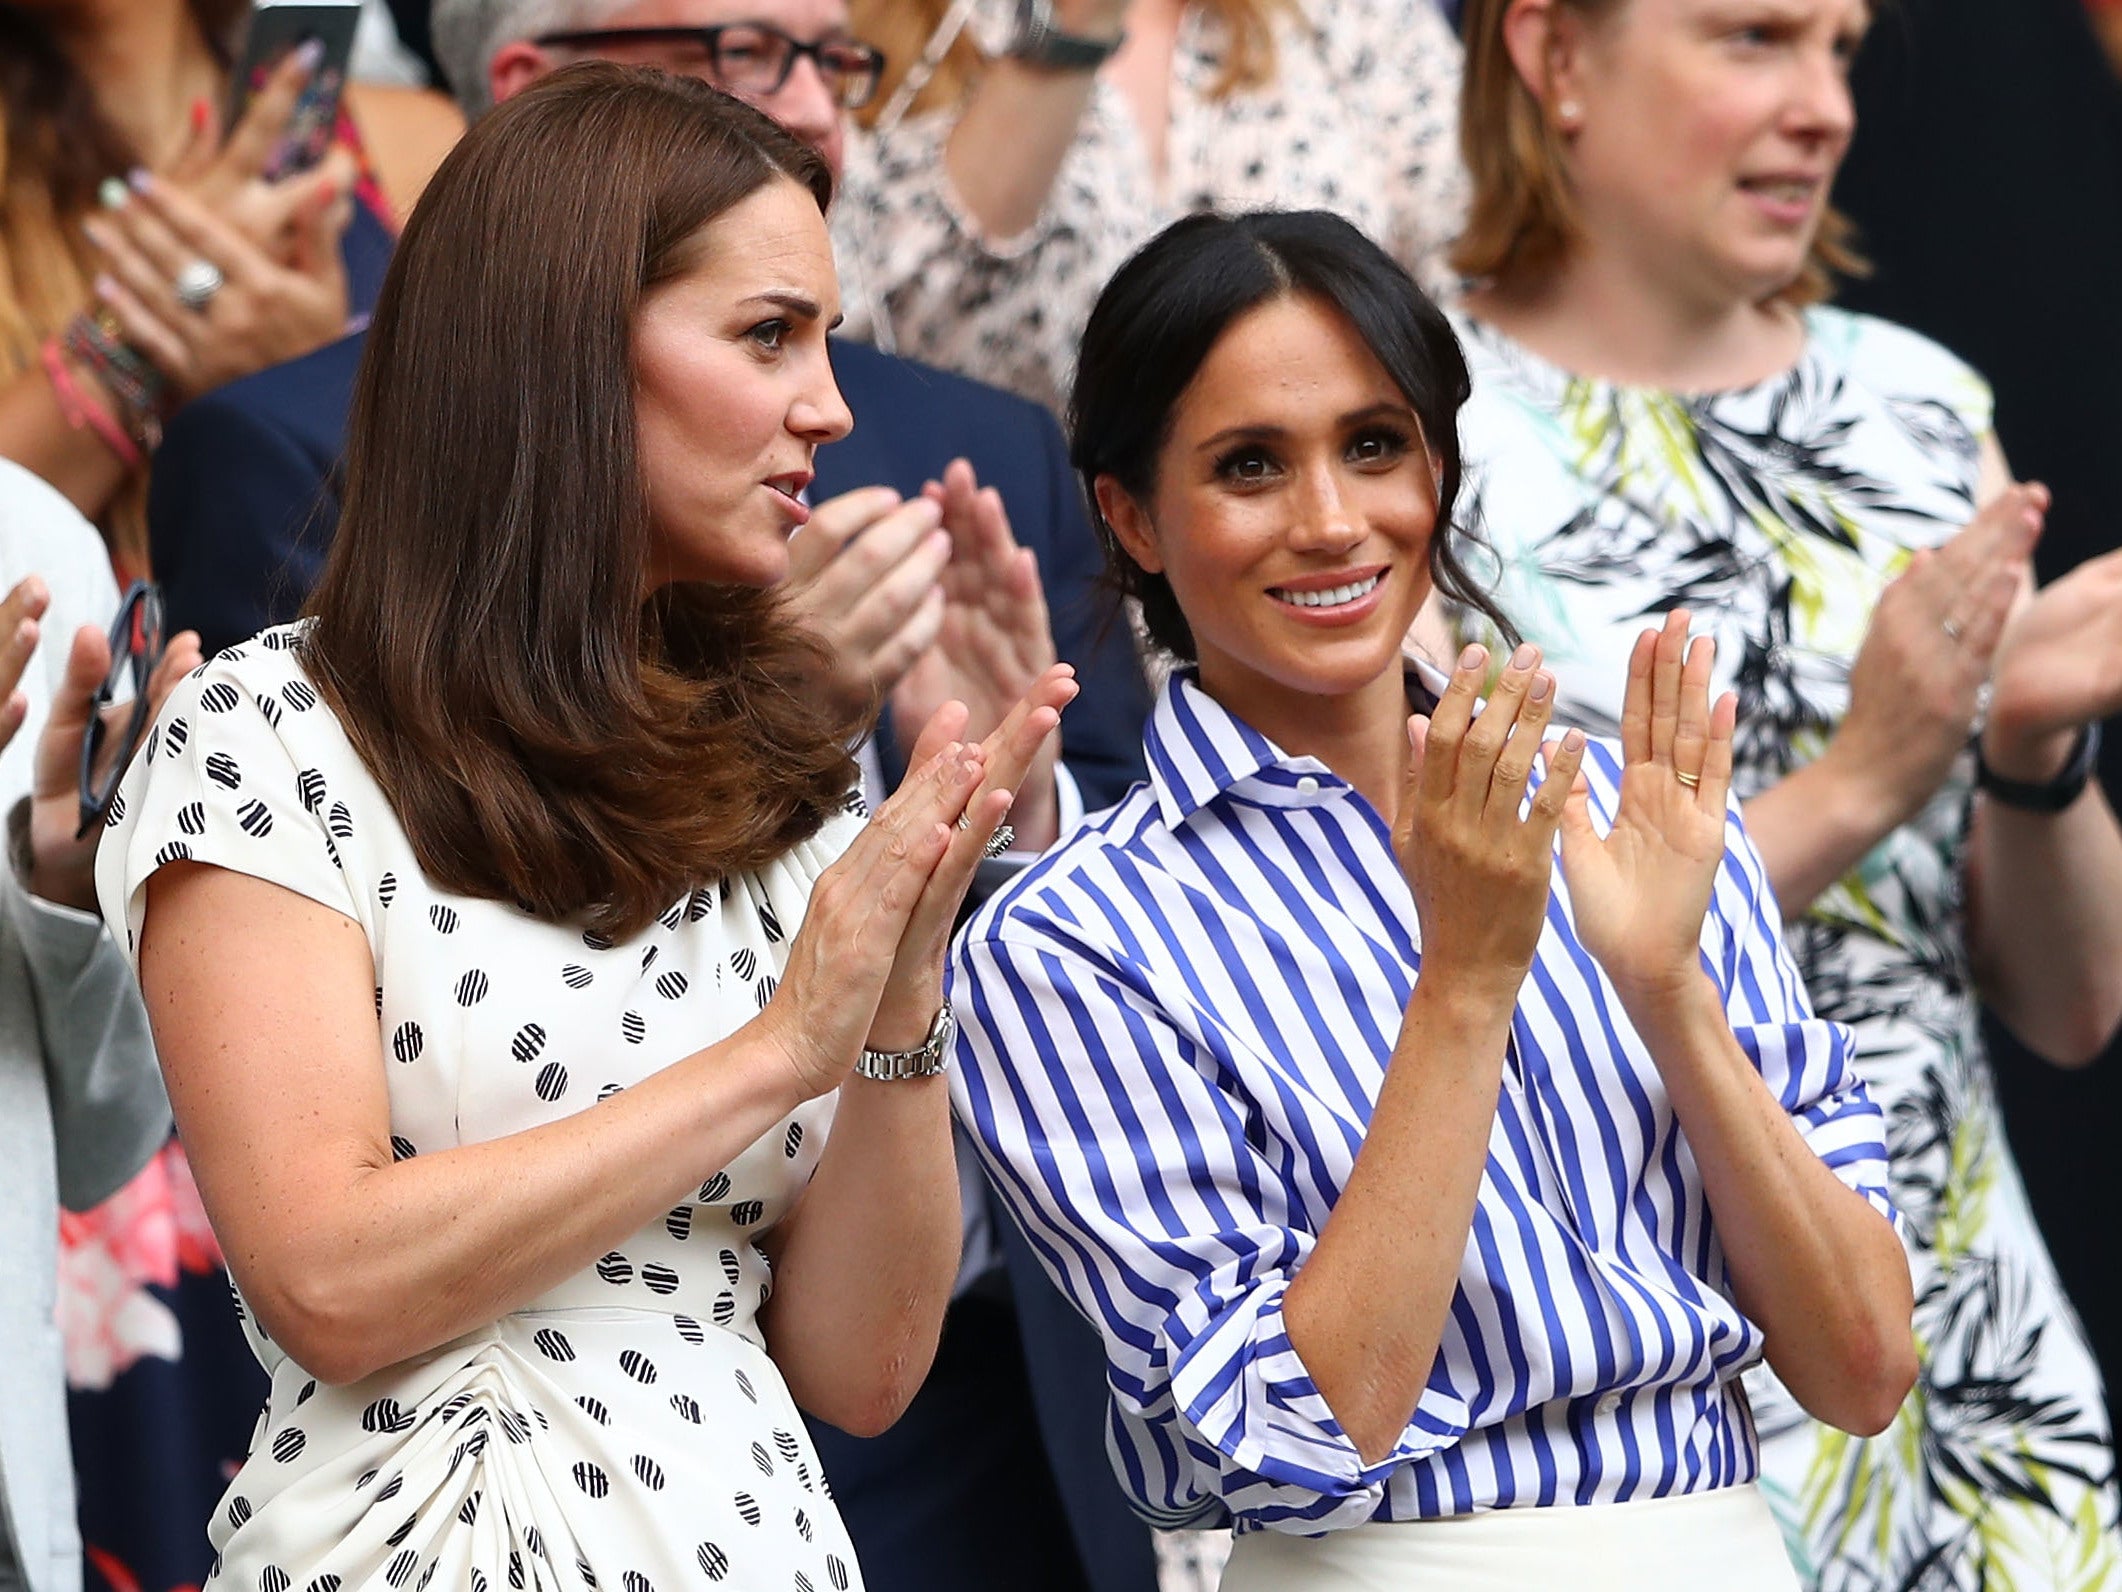 The Duchesses of Cambridge and Sussex attend the women's singles final at Wimbledon 2018